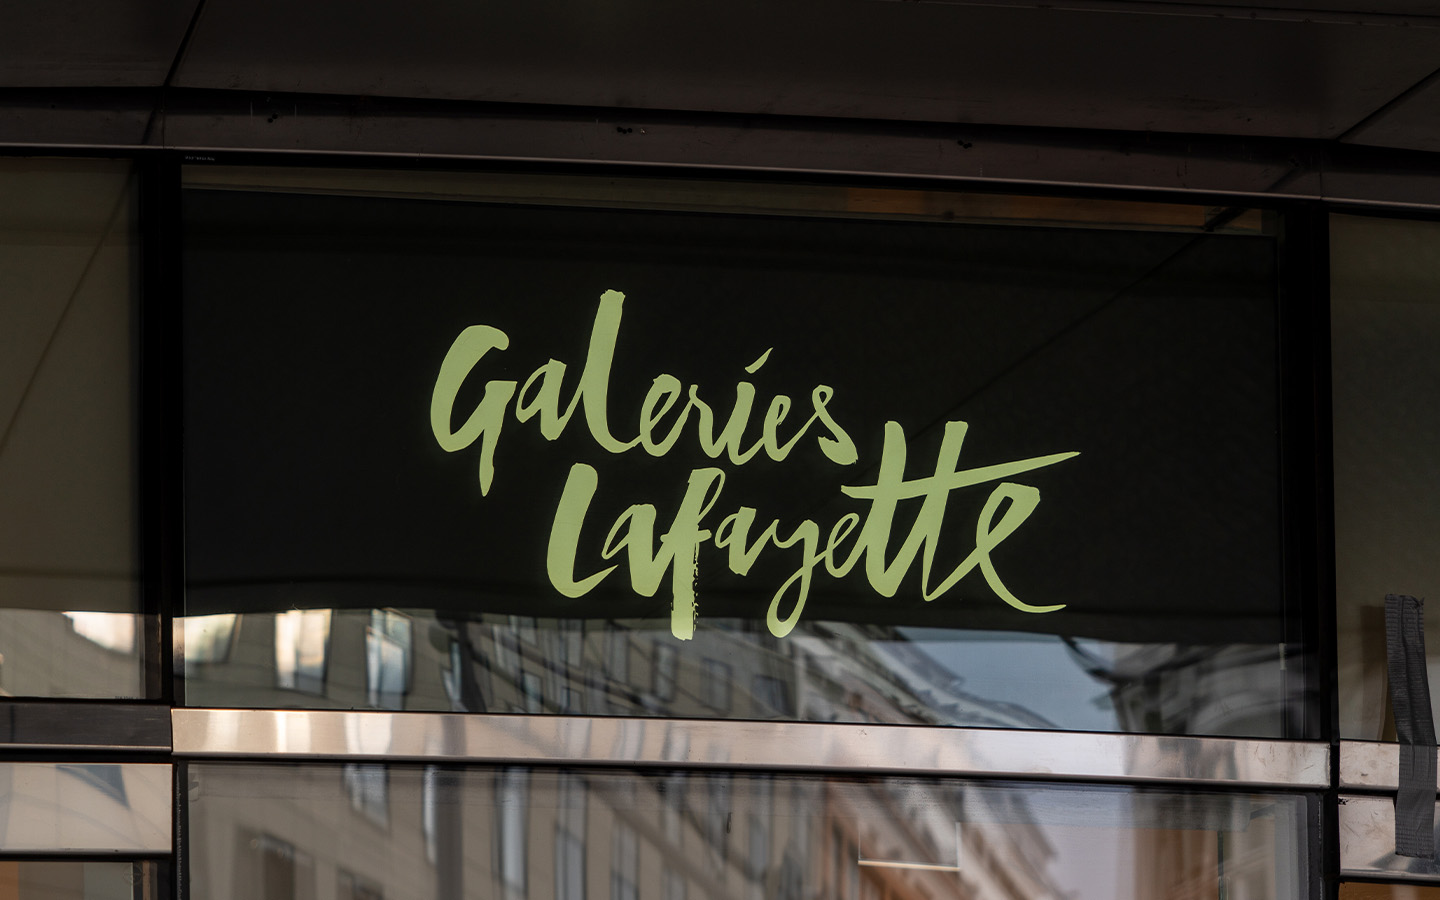 Galeries Lafayette has set an opening date